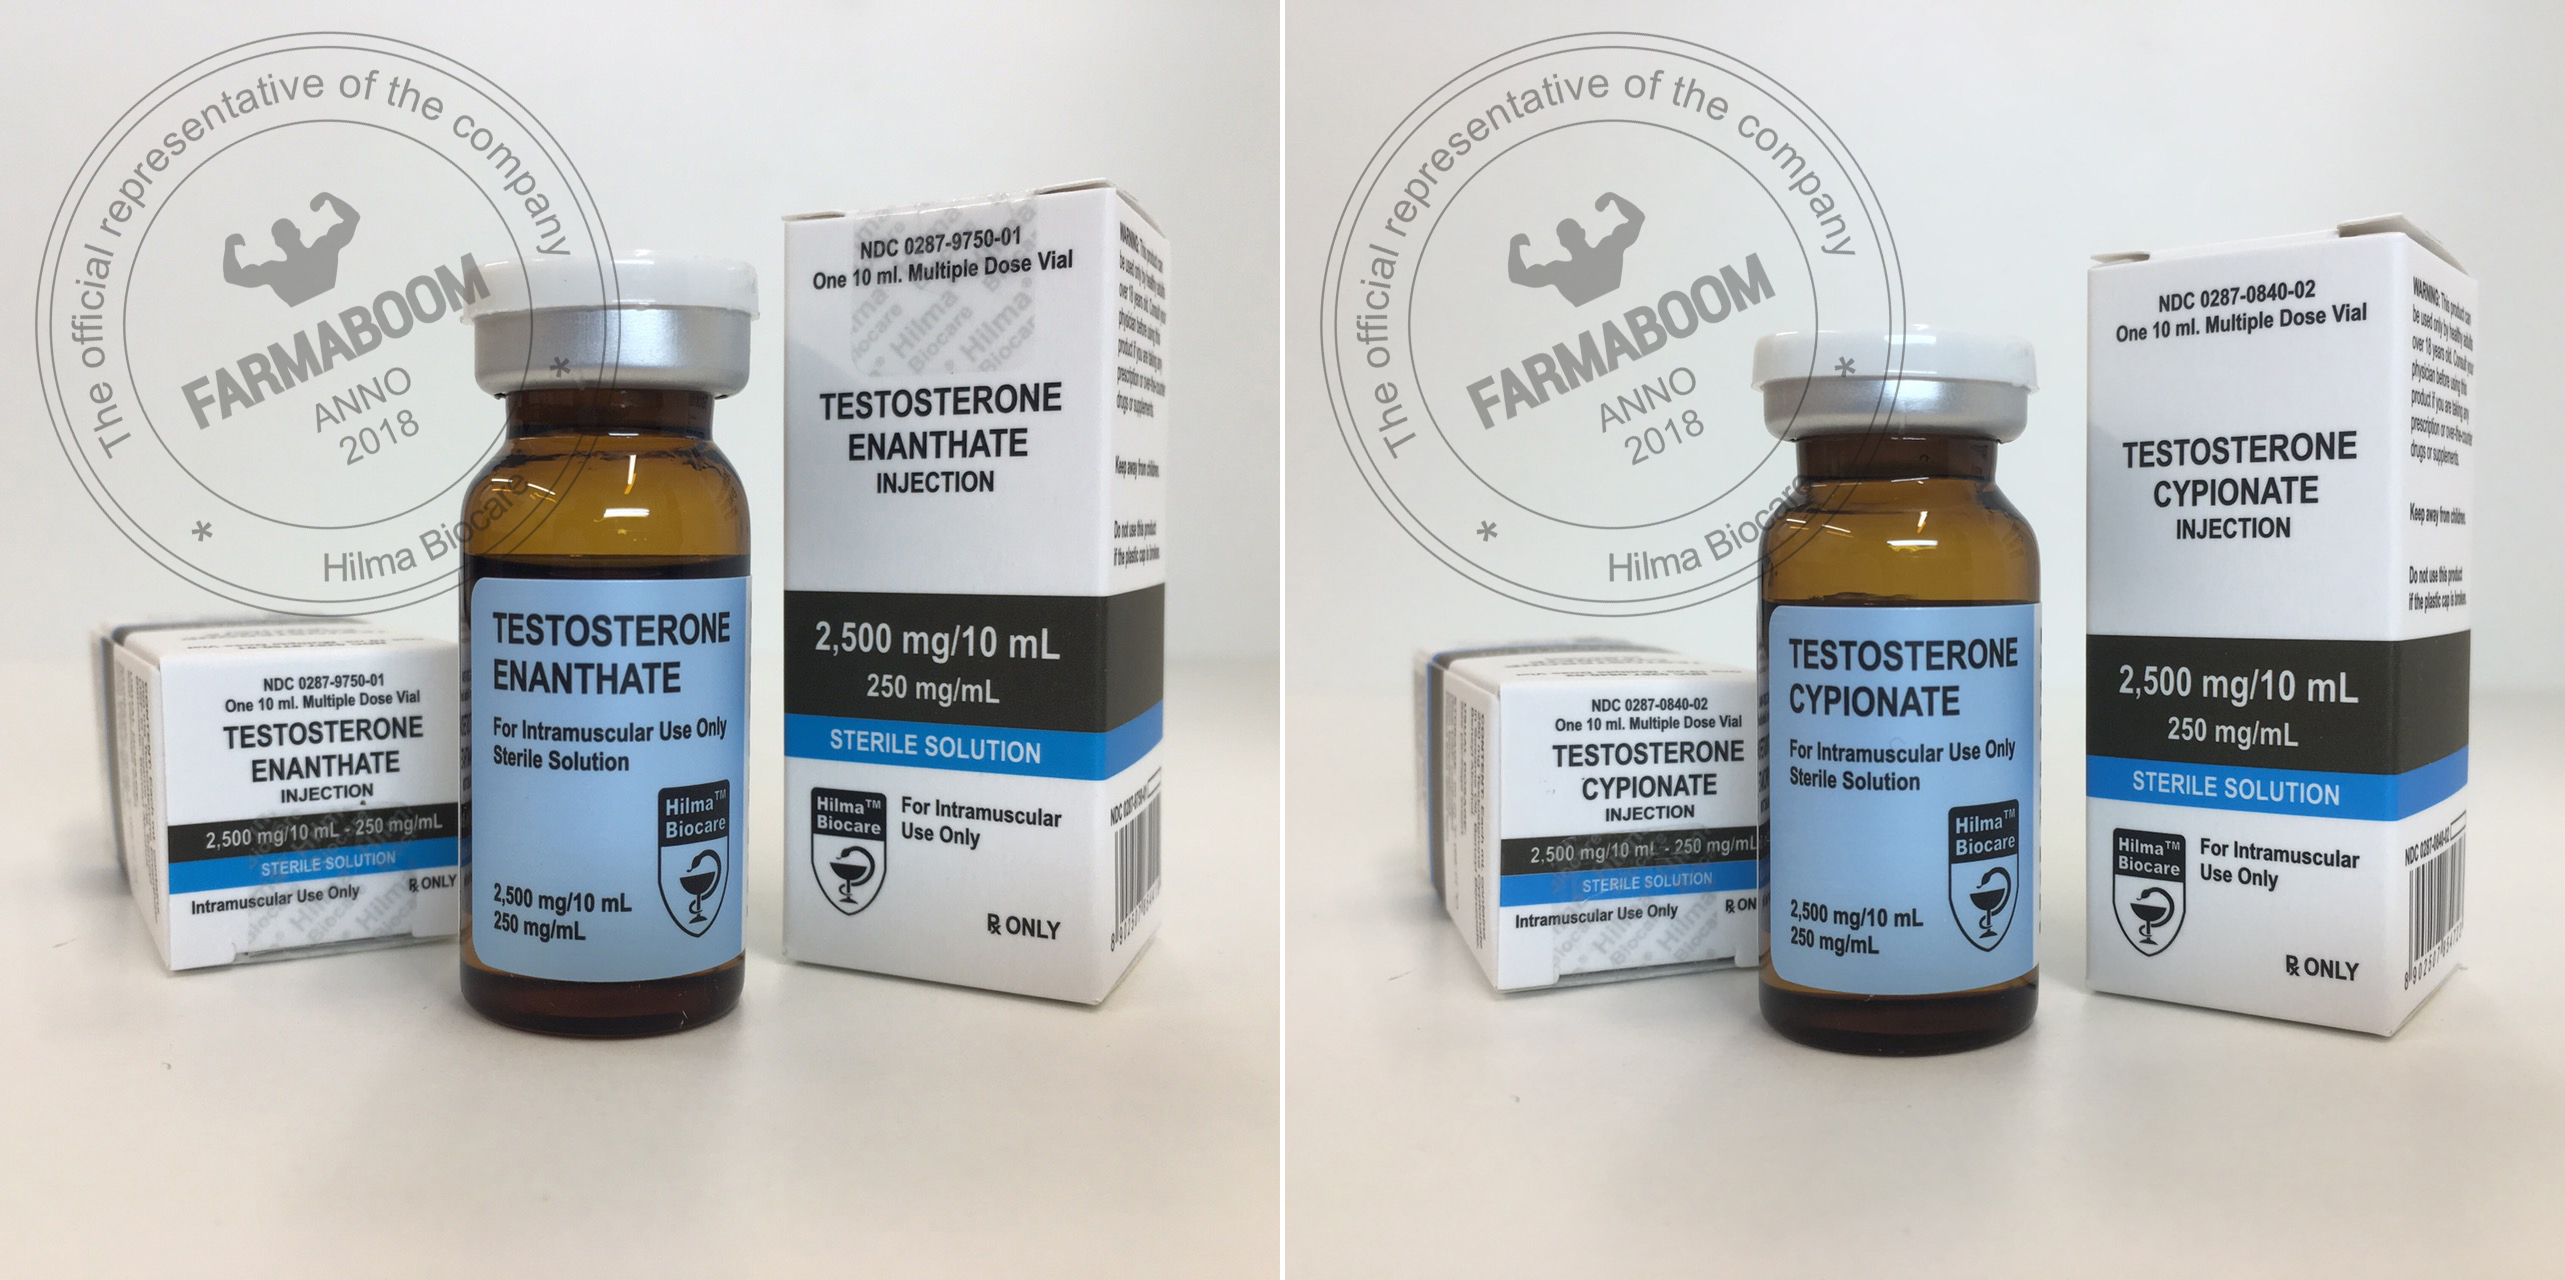 Testosterone enanthate and cypionate